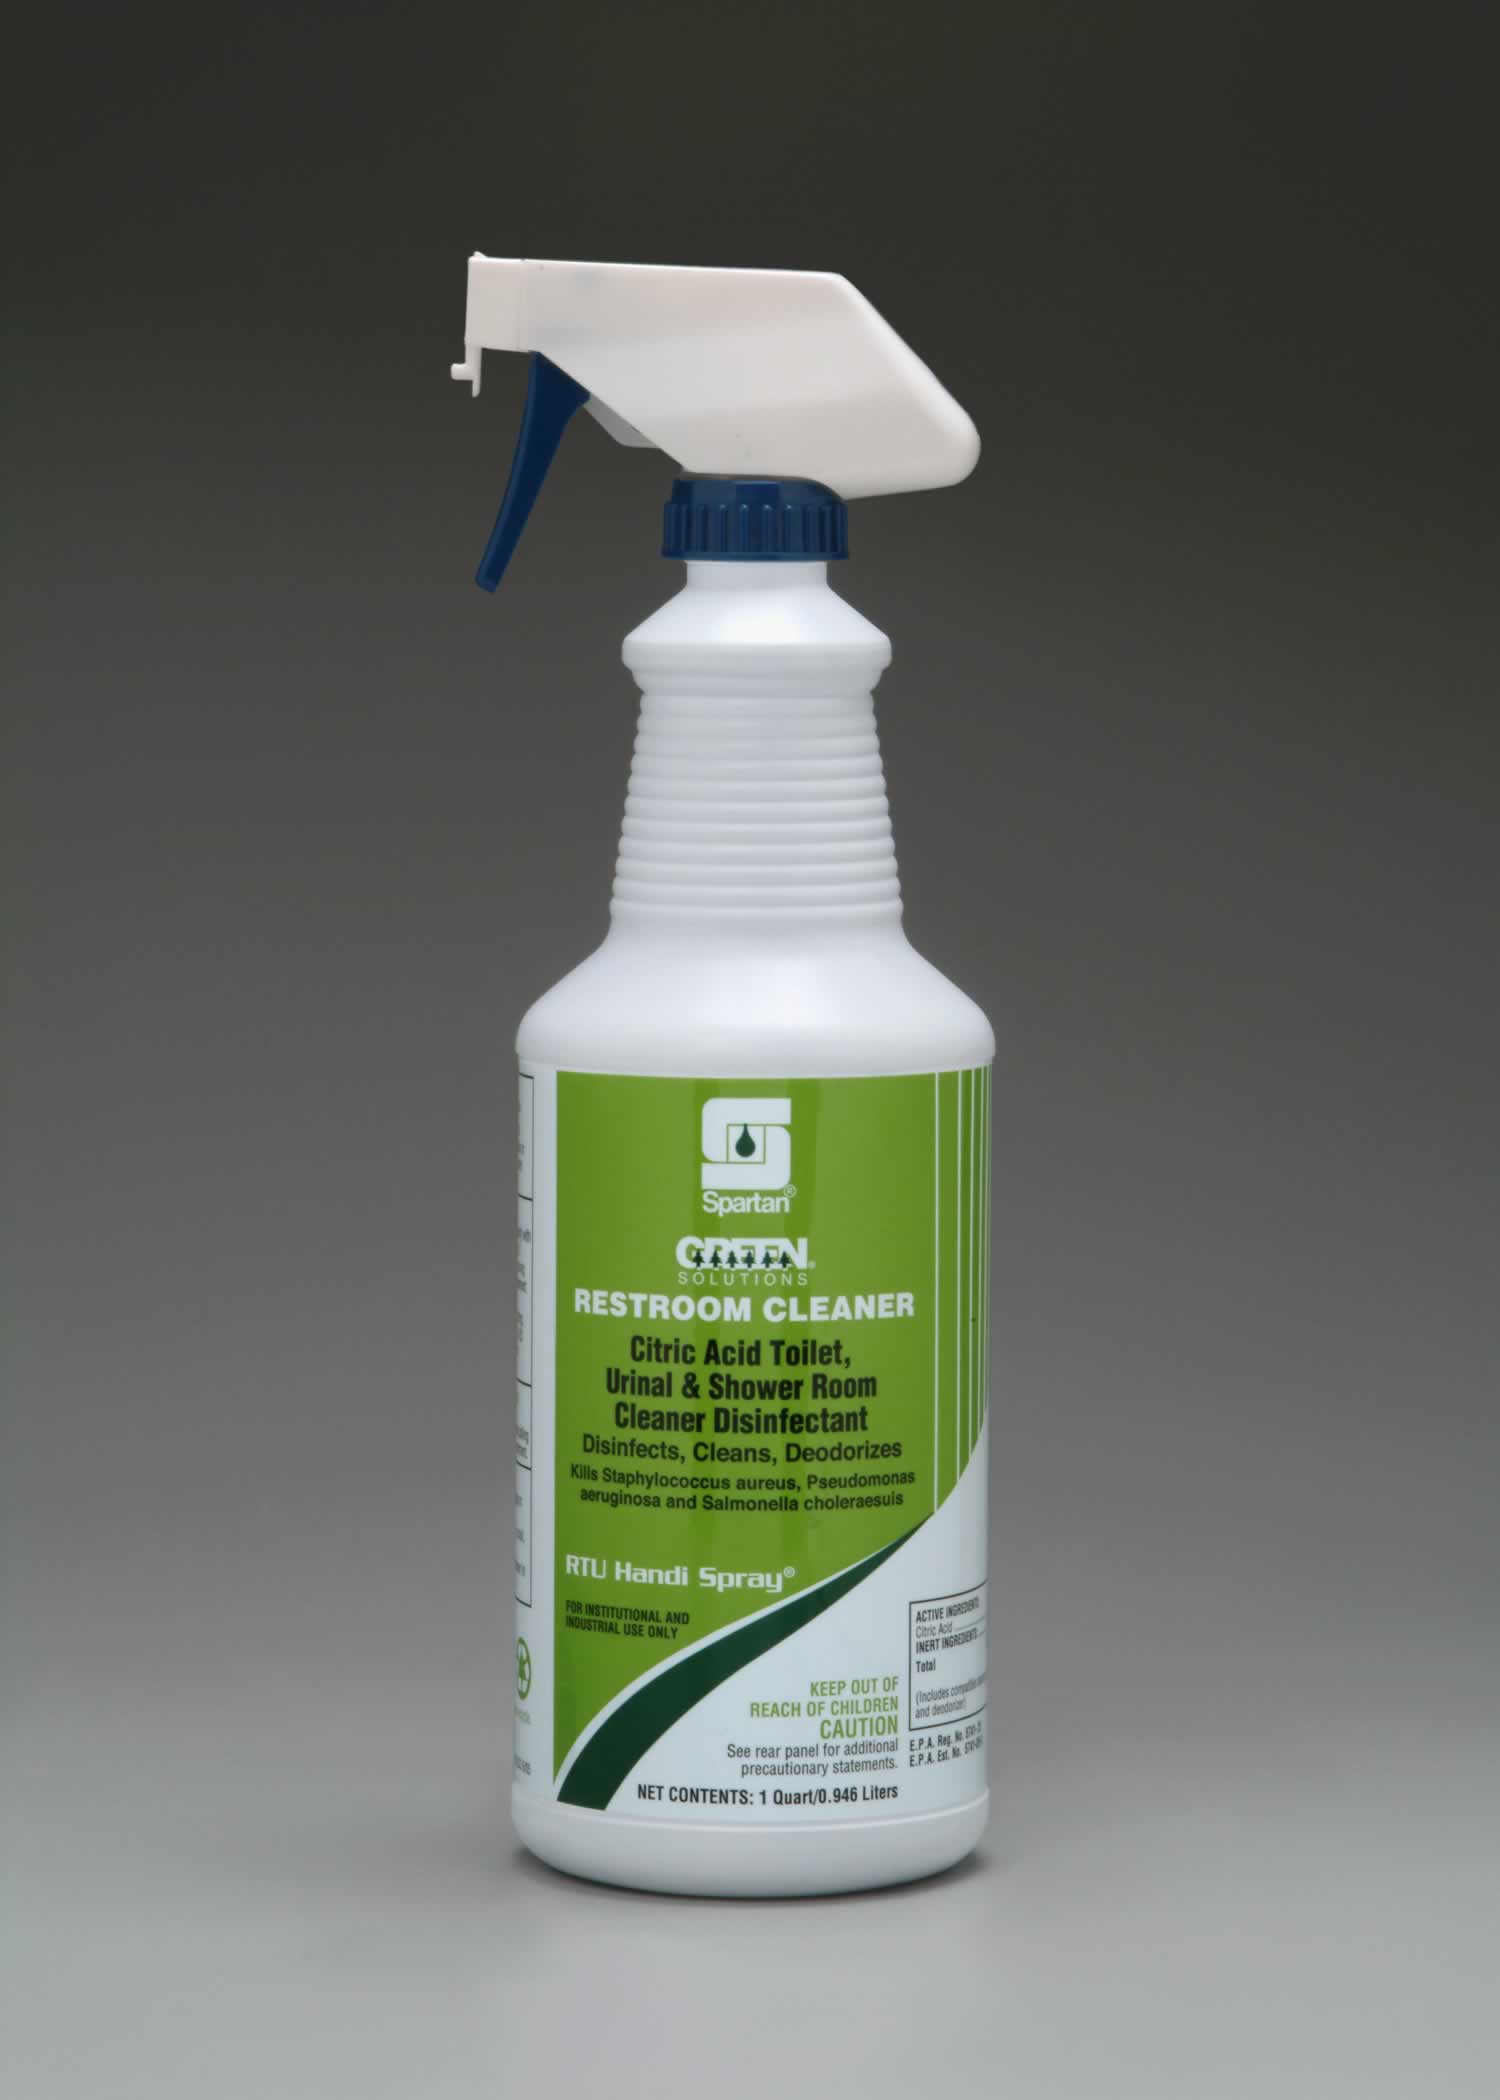 GS Restroom Cleaner quickly removes soap scum, water spots, and light rust